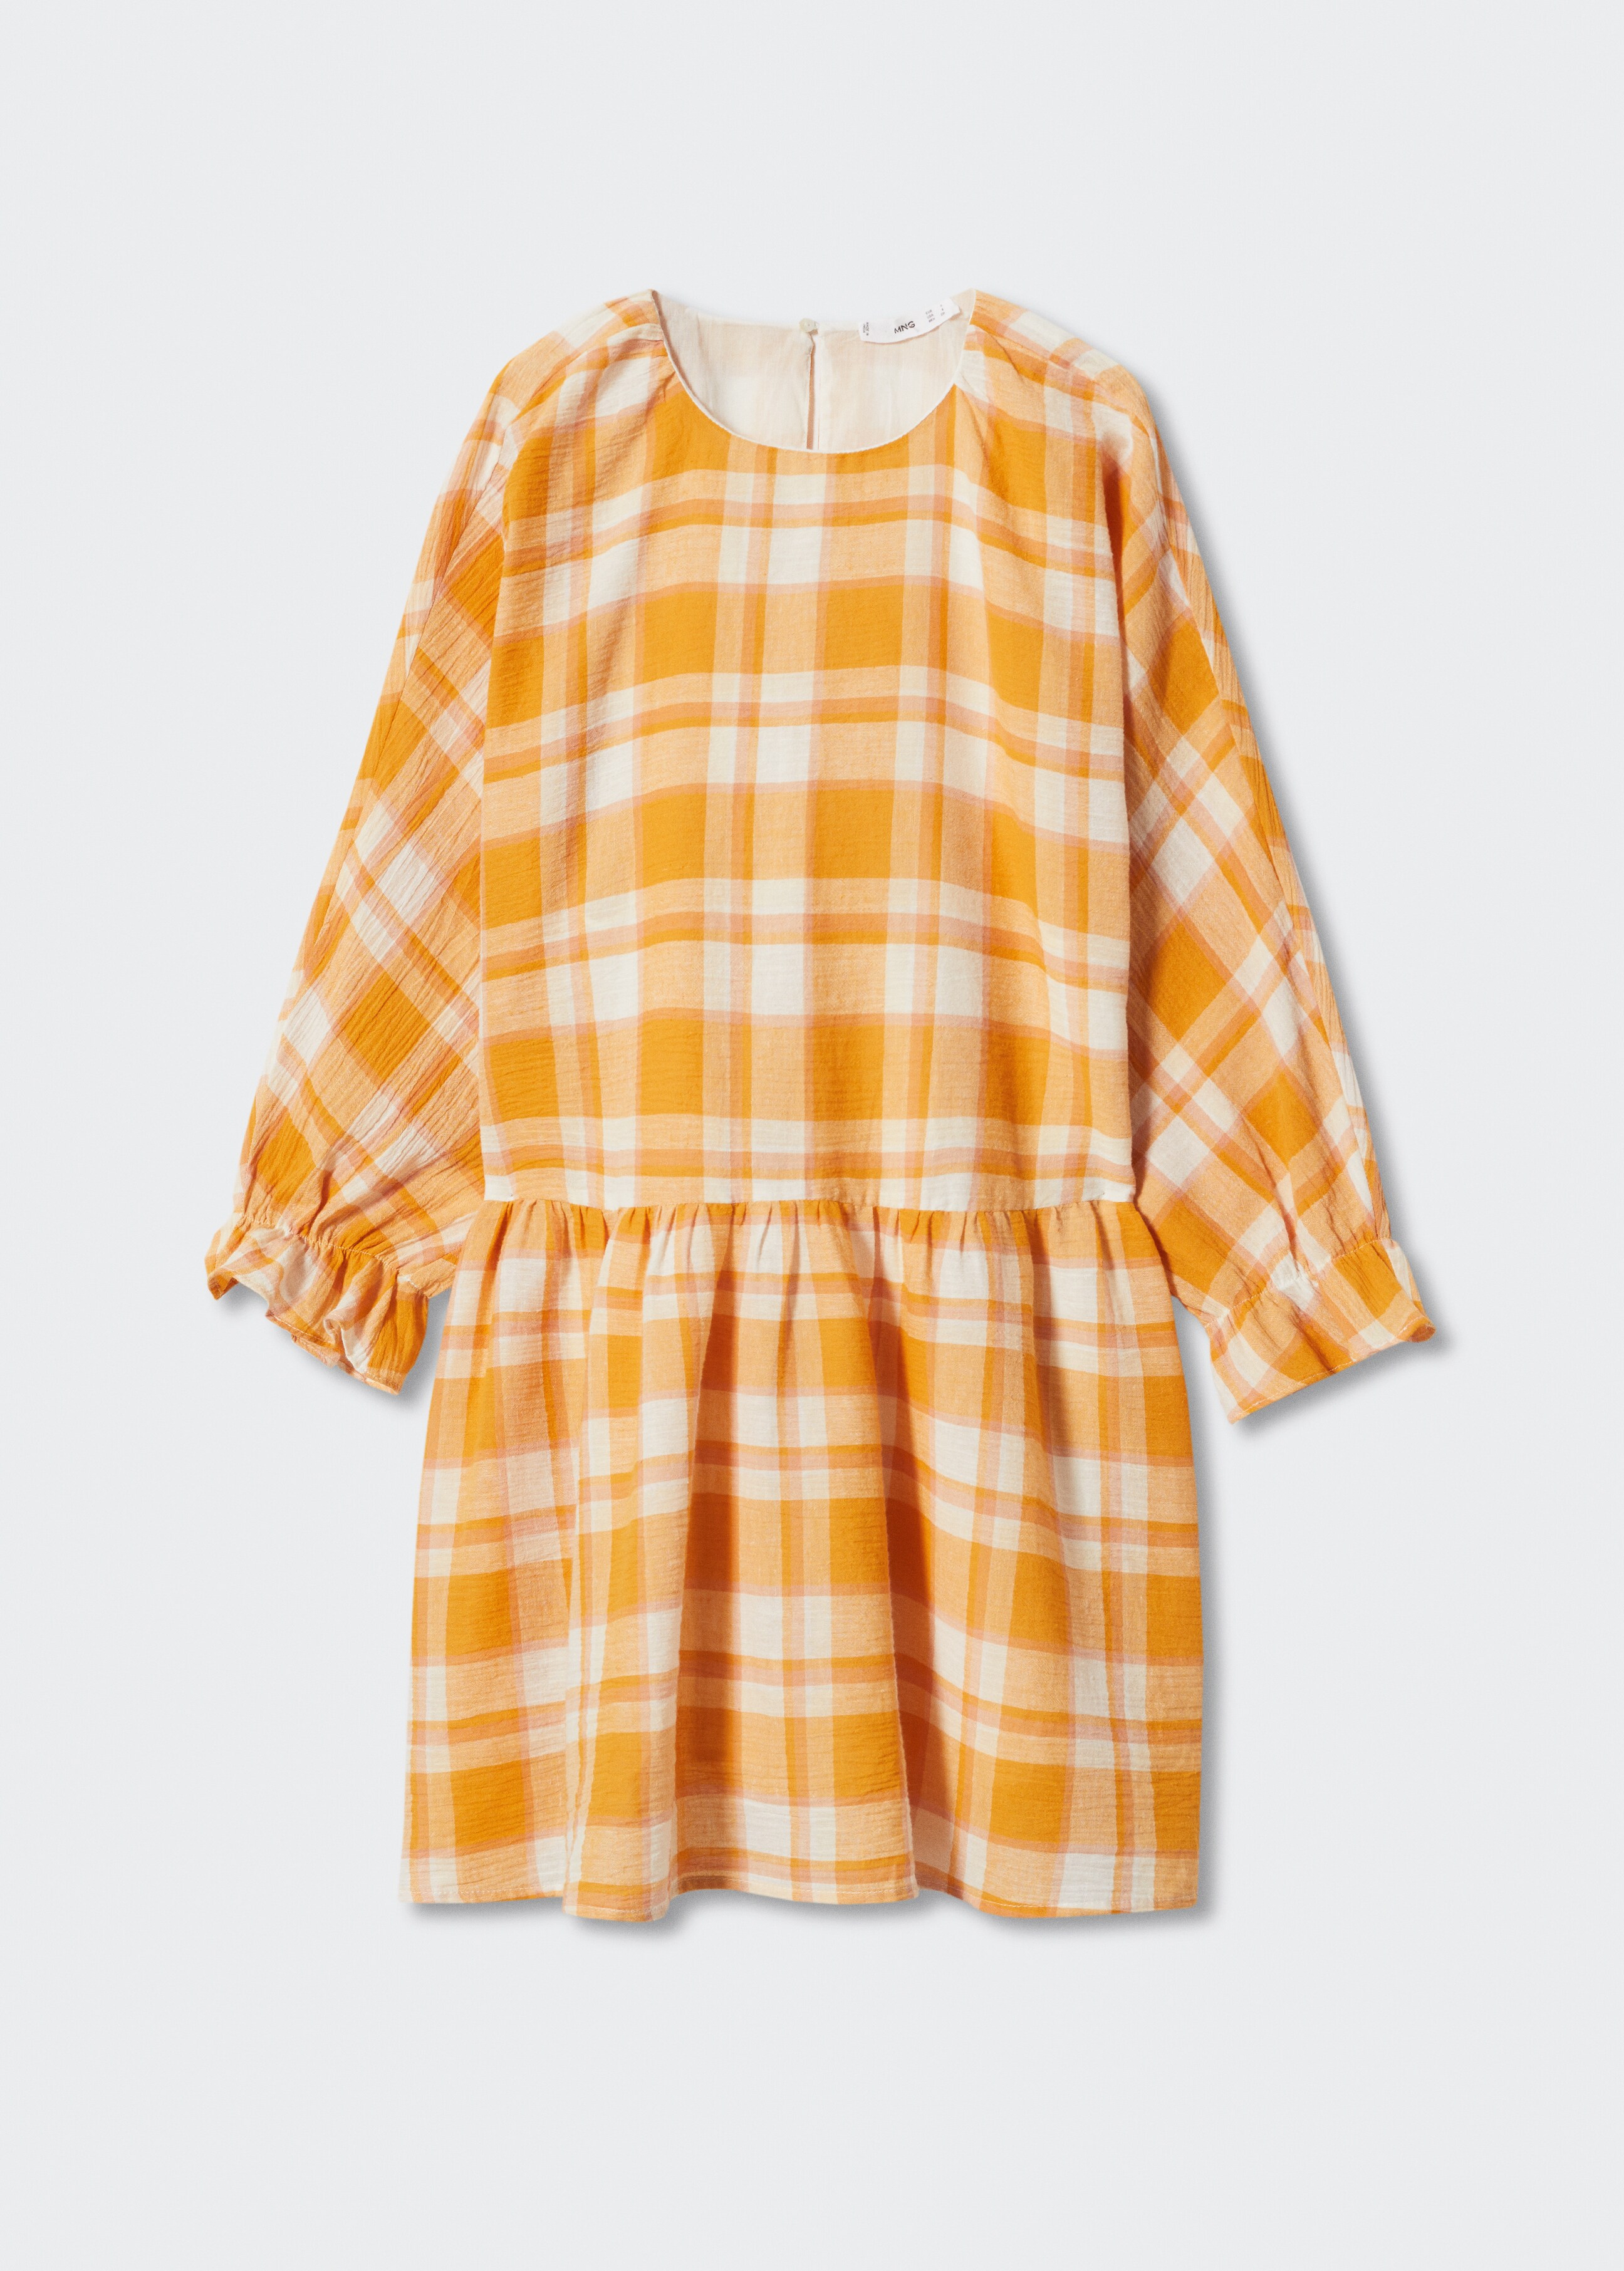 Checked cotton dress - Article without model